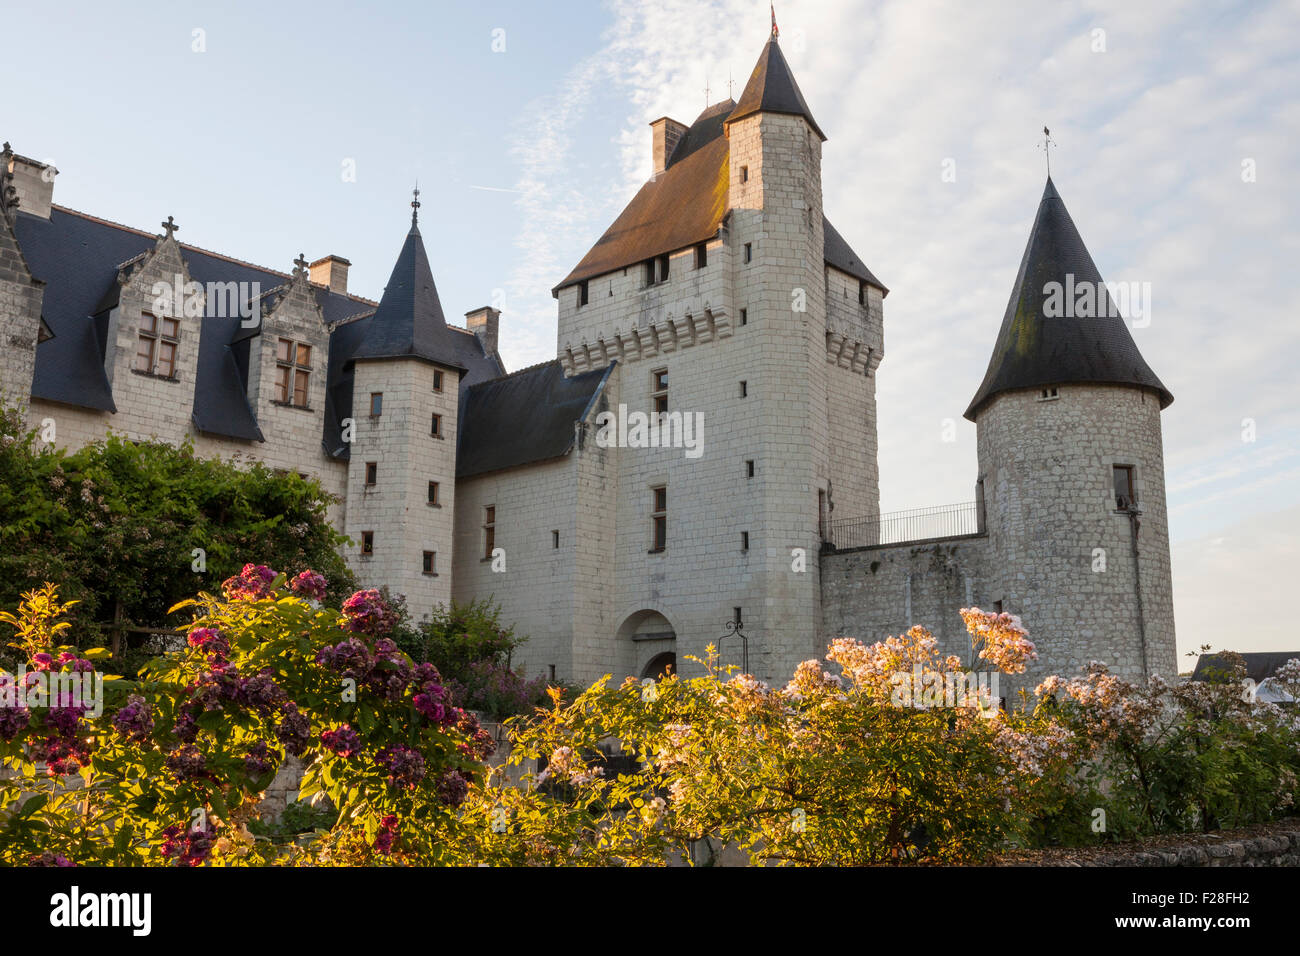 Early morning light on the Chateau du Rivau, with rose beds in foreground Stock Photo